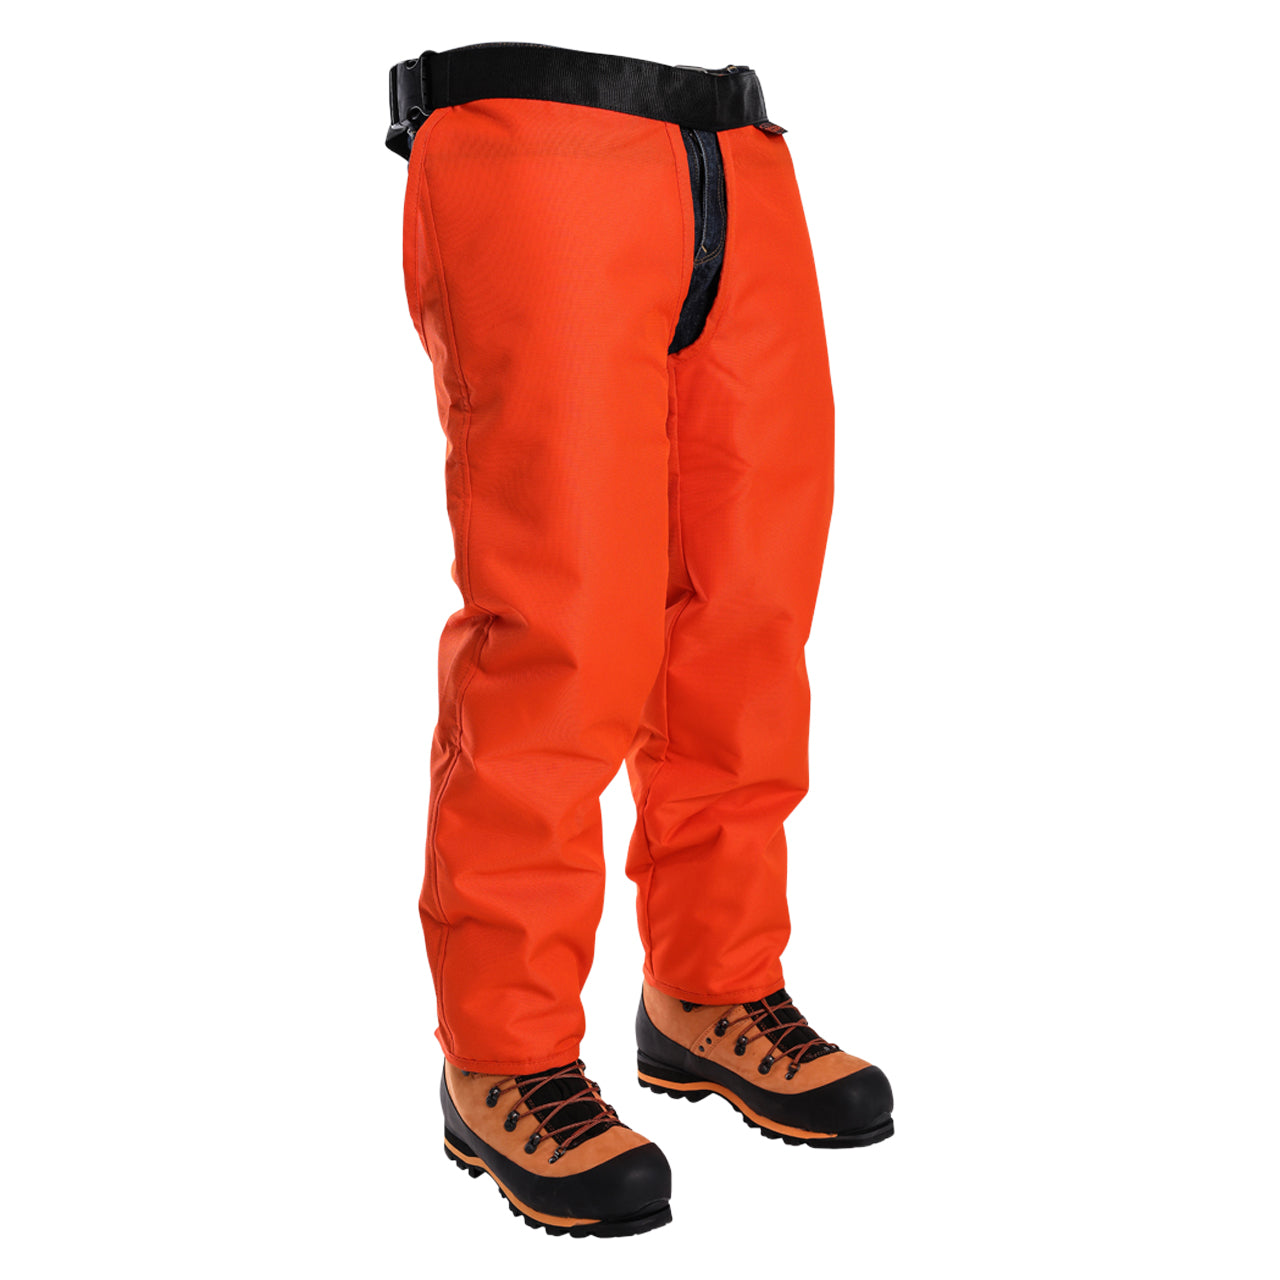 Clogger C8 Trouser Leg Occasional Use Chainsaw Protective Chaps - RDO Equipment